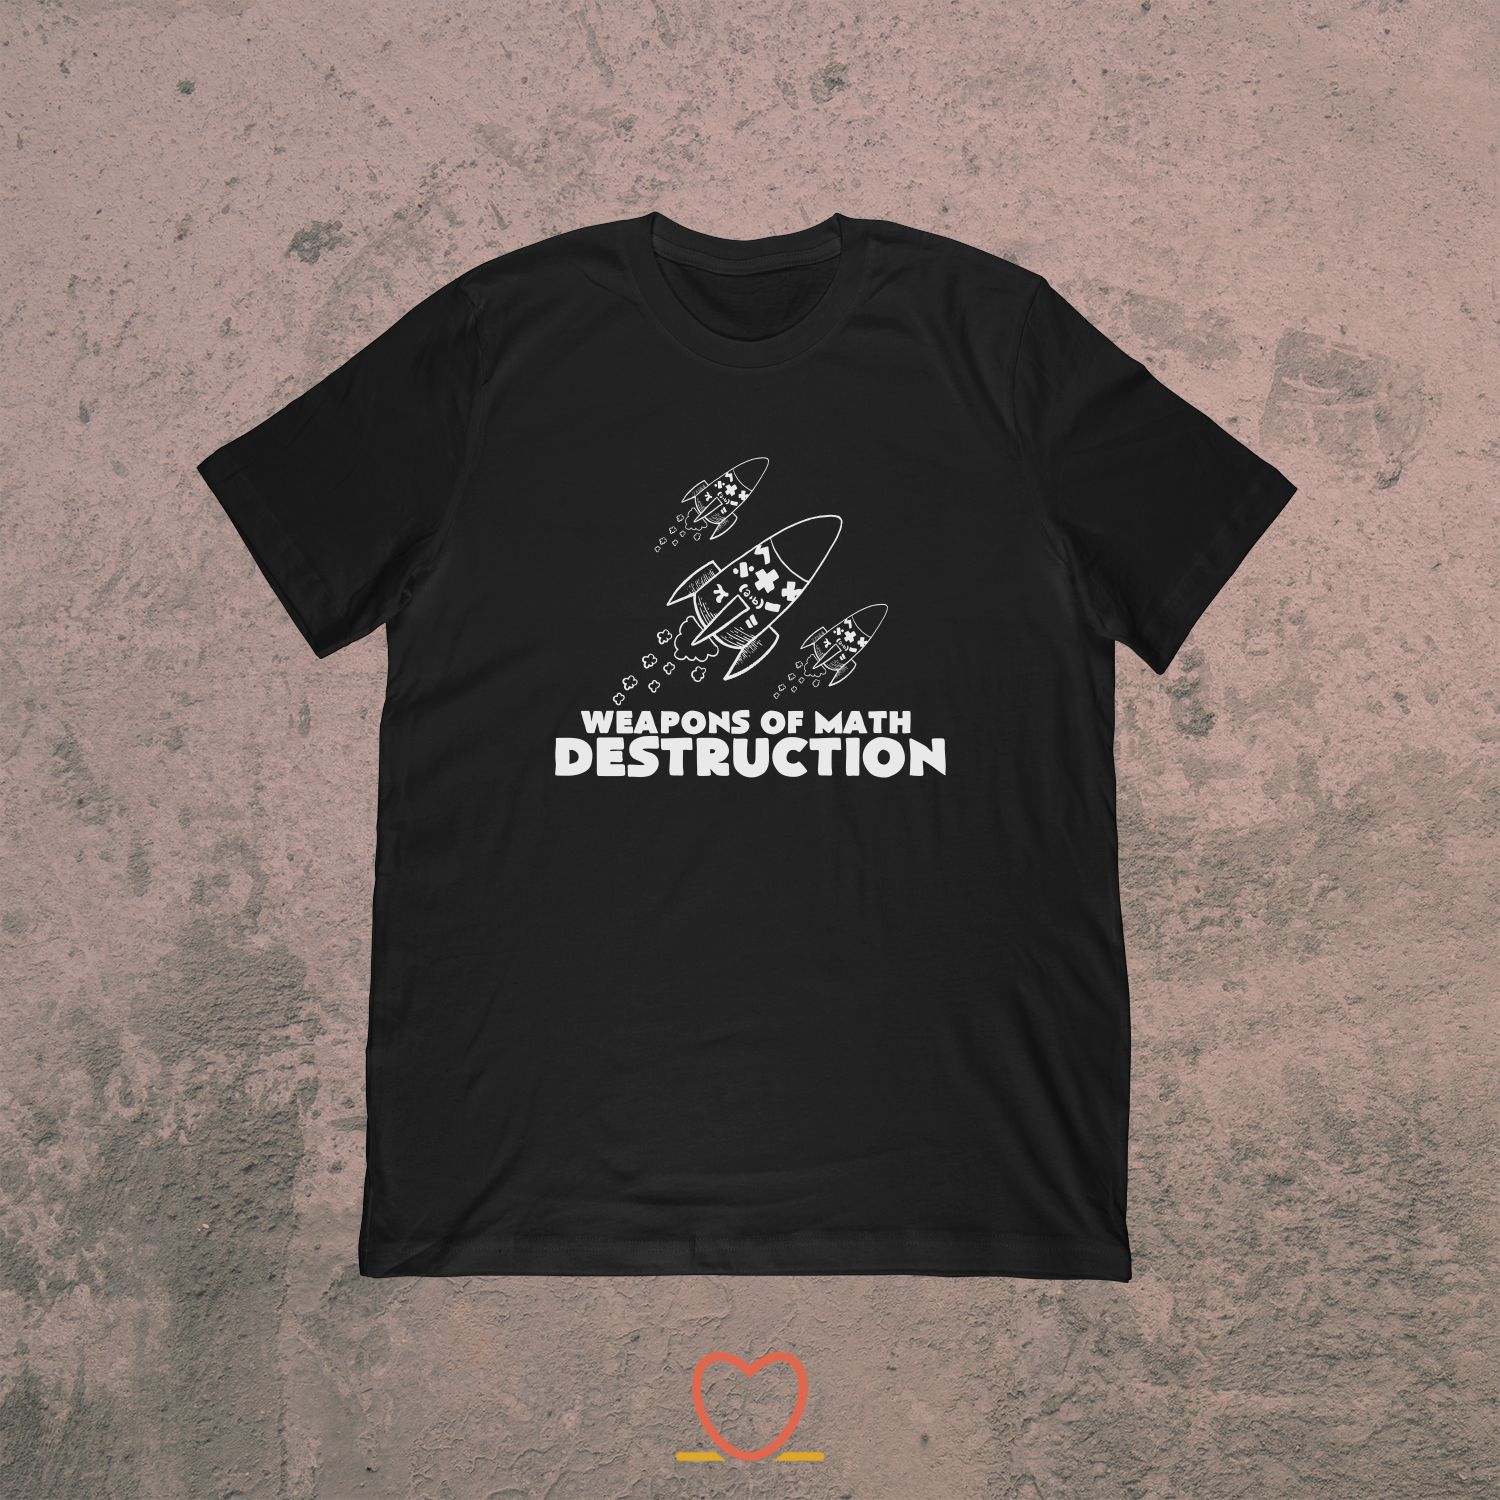 Weapons of Math Destruction – Funny Math Tee